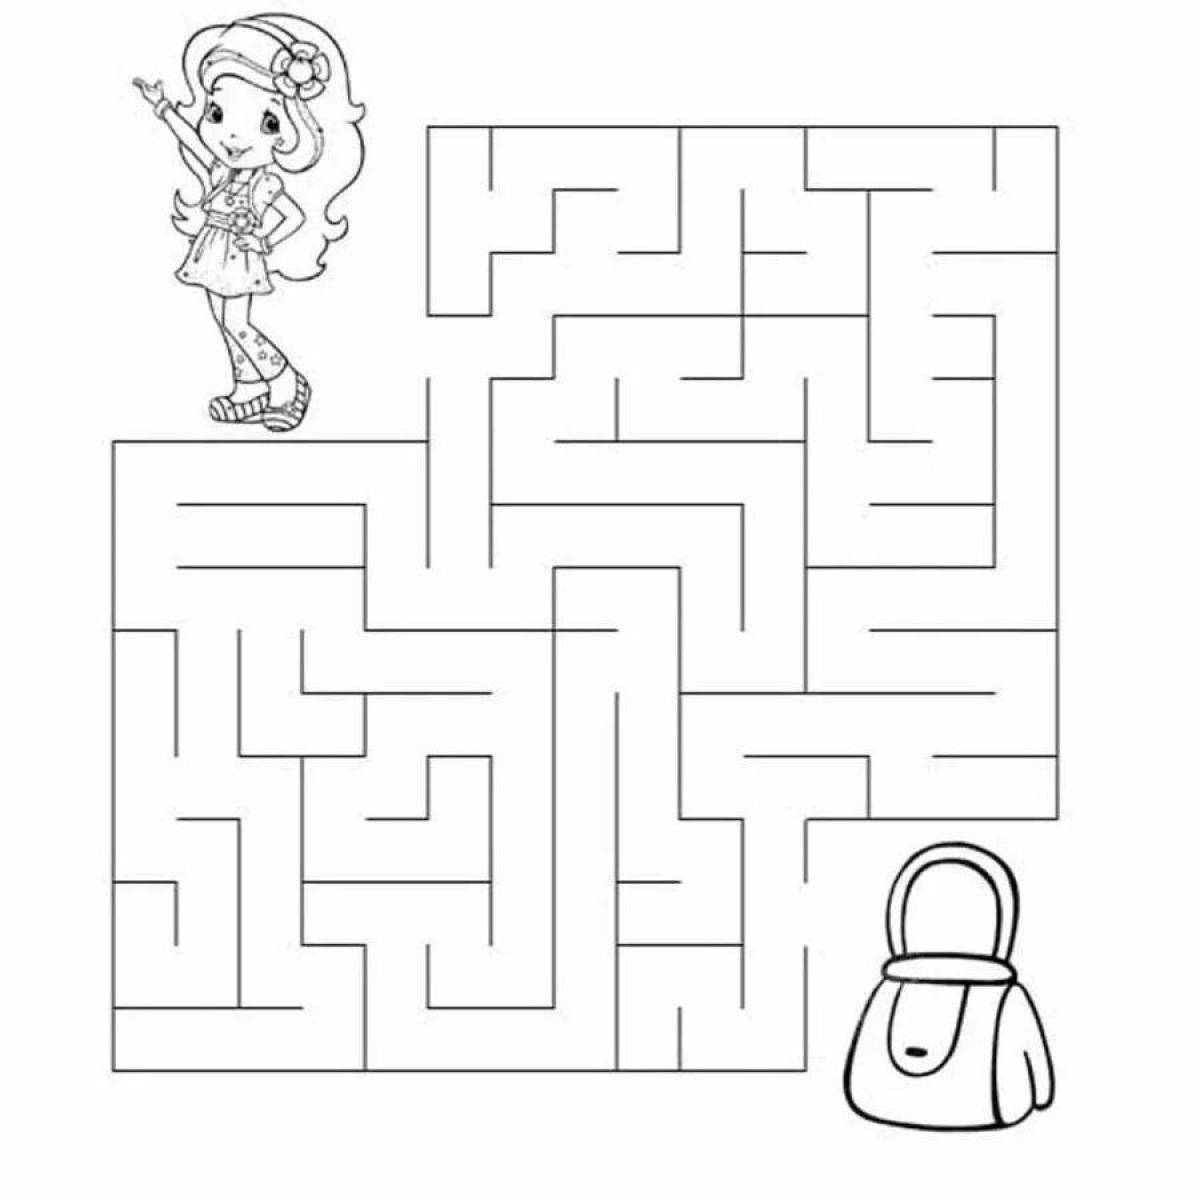 Exciting coloring game for girls 4-5 years old